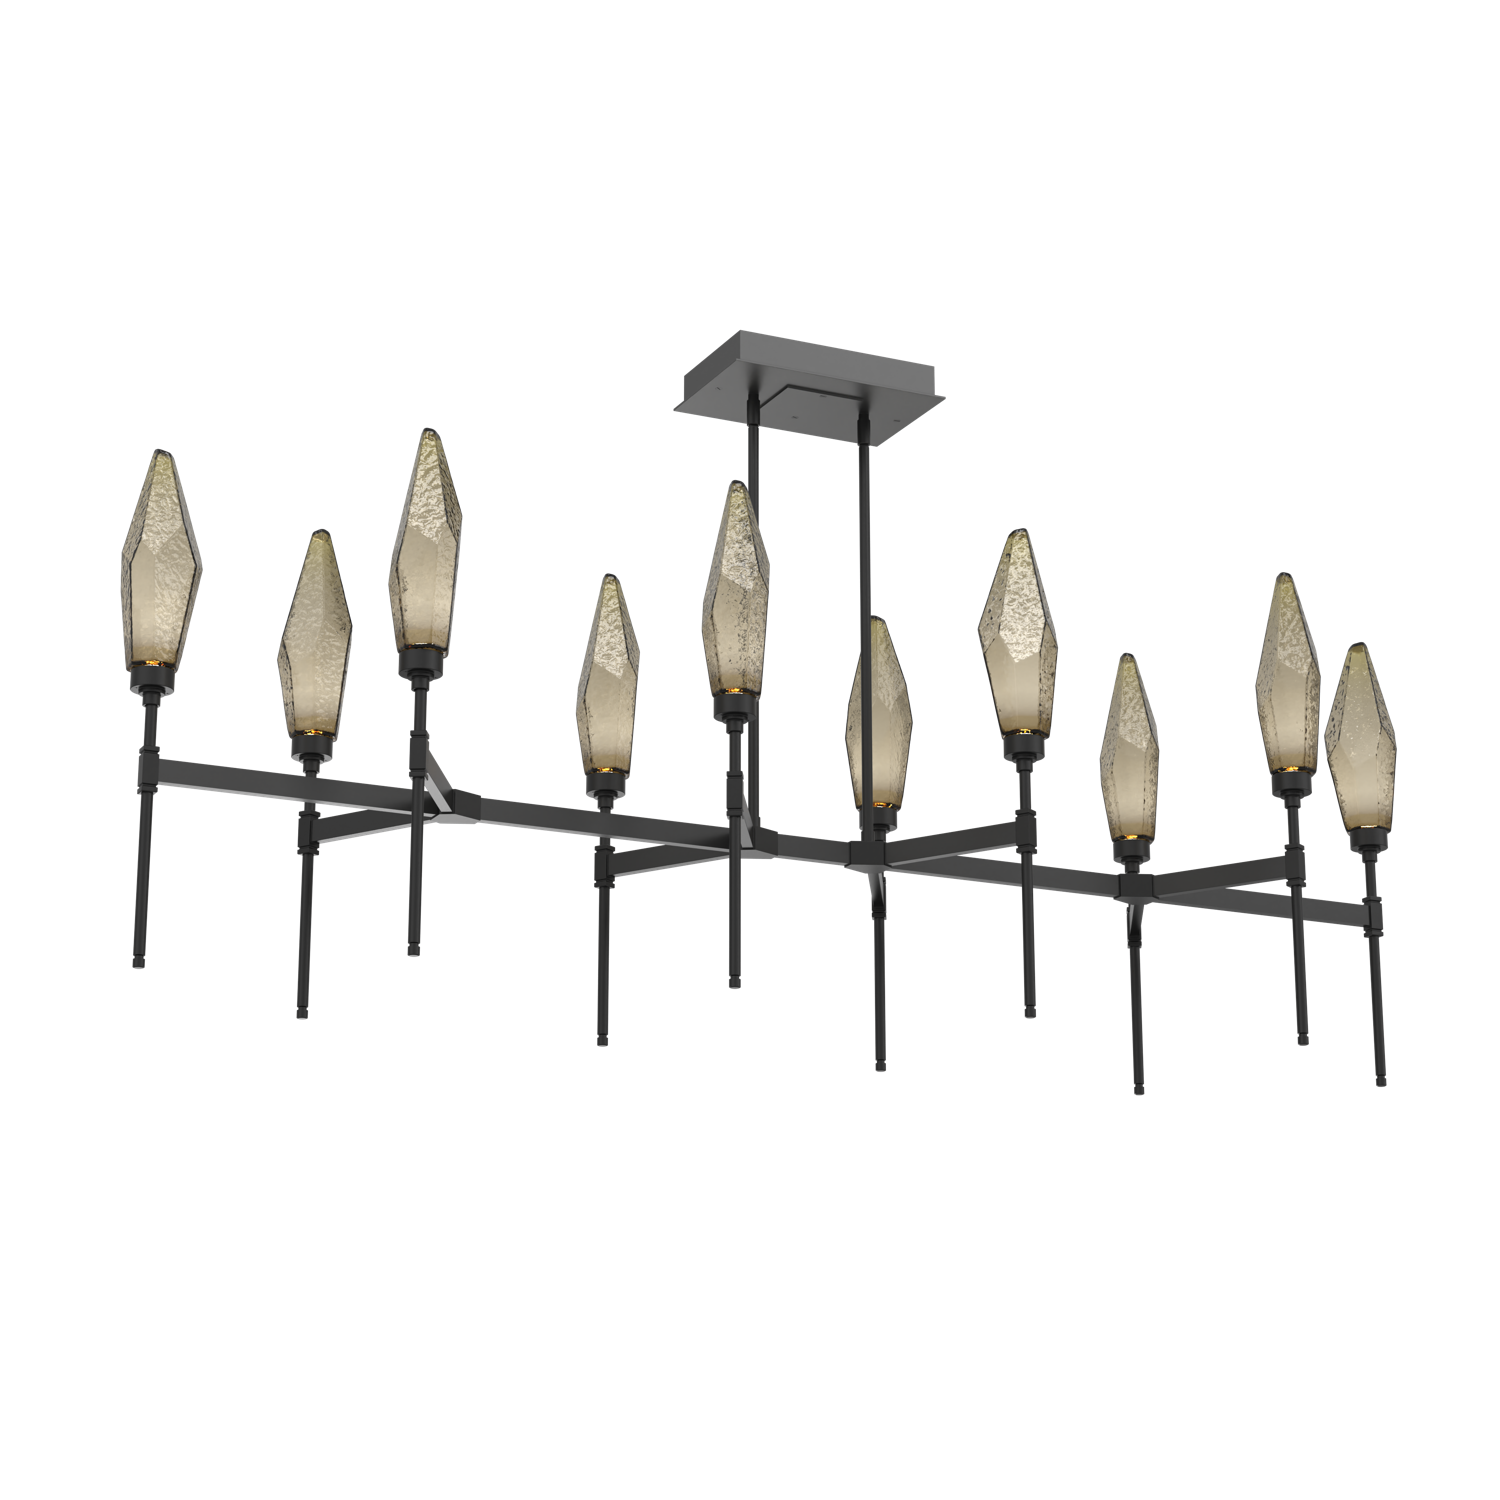 PLB0050-67-MB-CB-Hammerton-Studio-Rock-Crystal-67-inch-linear-belvedere-chandelier-with-matte-black-finish-and-chilled-bronze-blown-glass-shades-and-LED-lamping